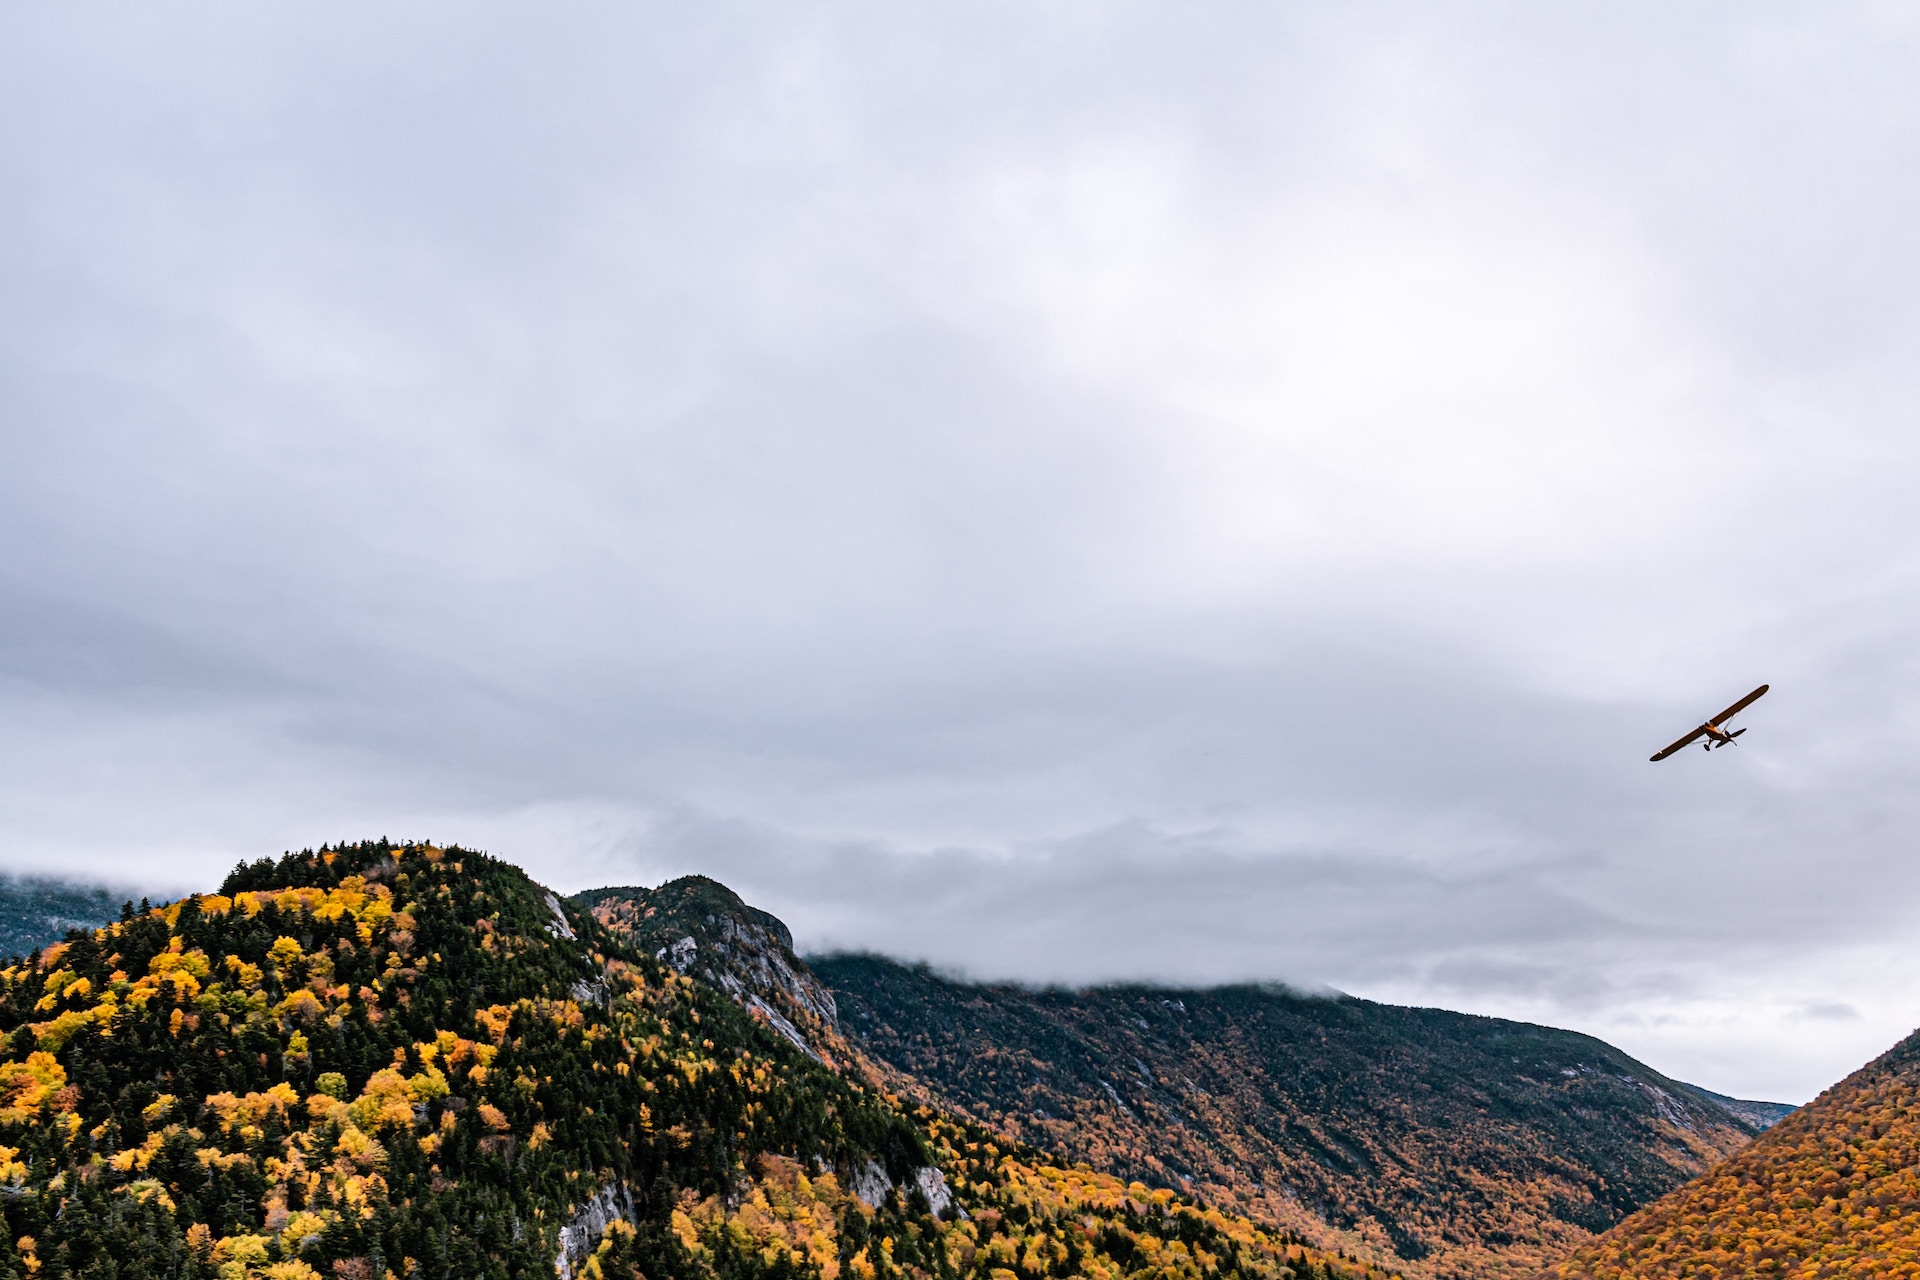 Franconia Notch in fall with plane above